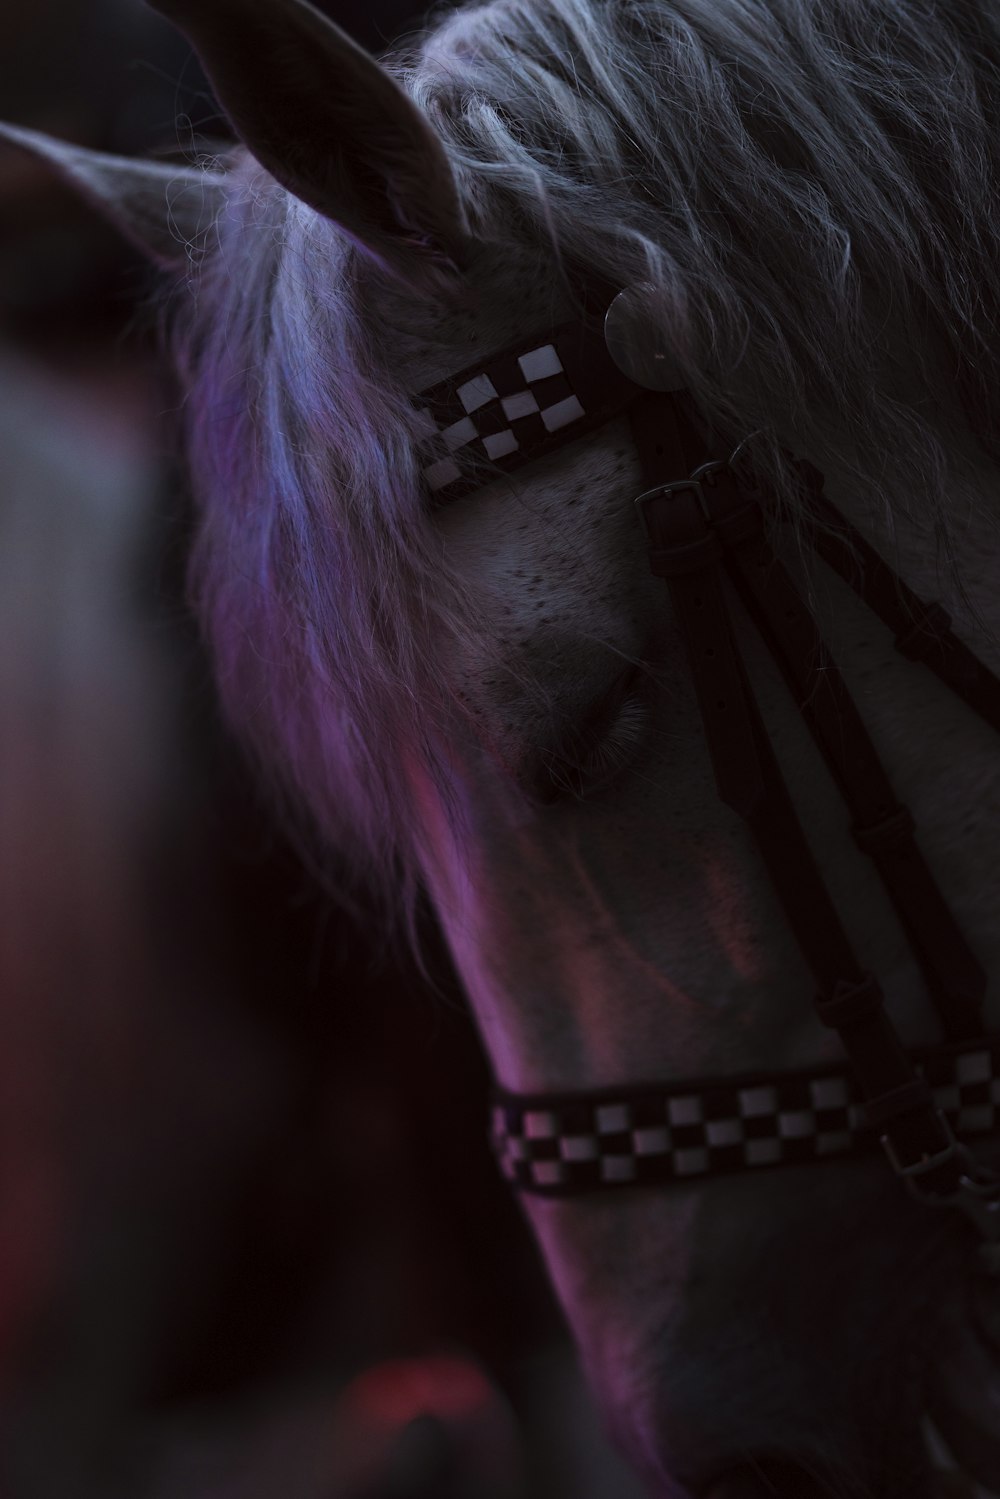 a close up of a horse wearing a harness